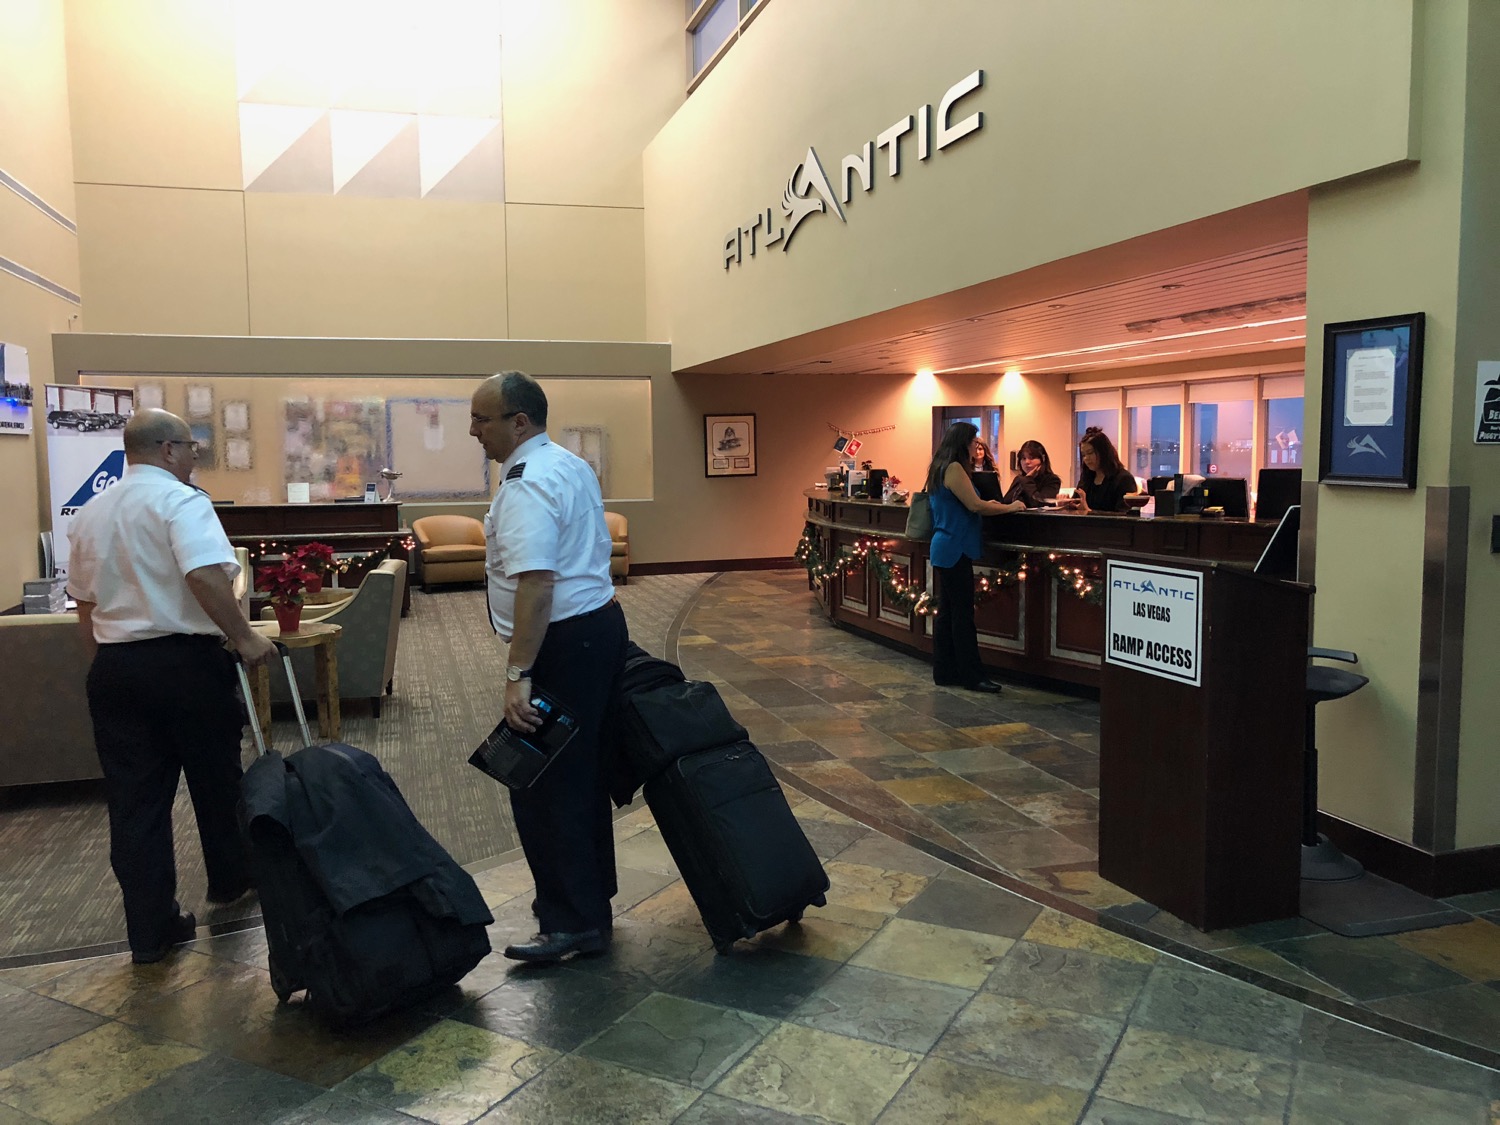 a group of people with luggage in a lobby